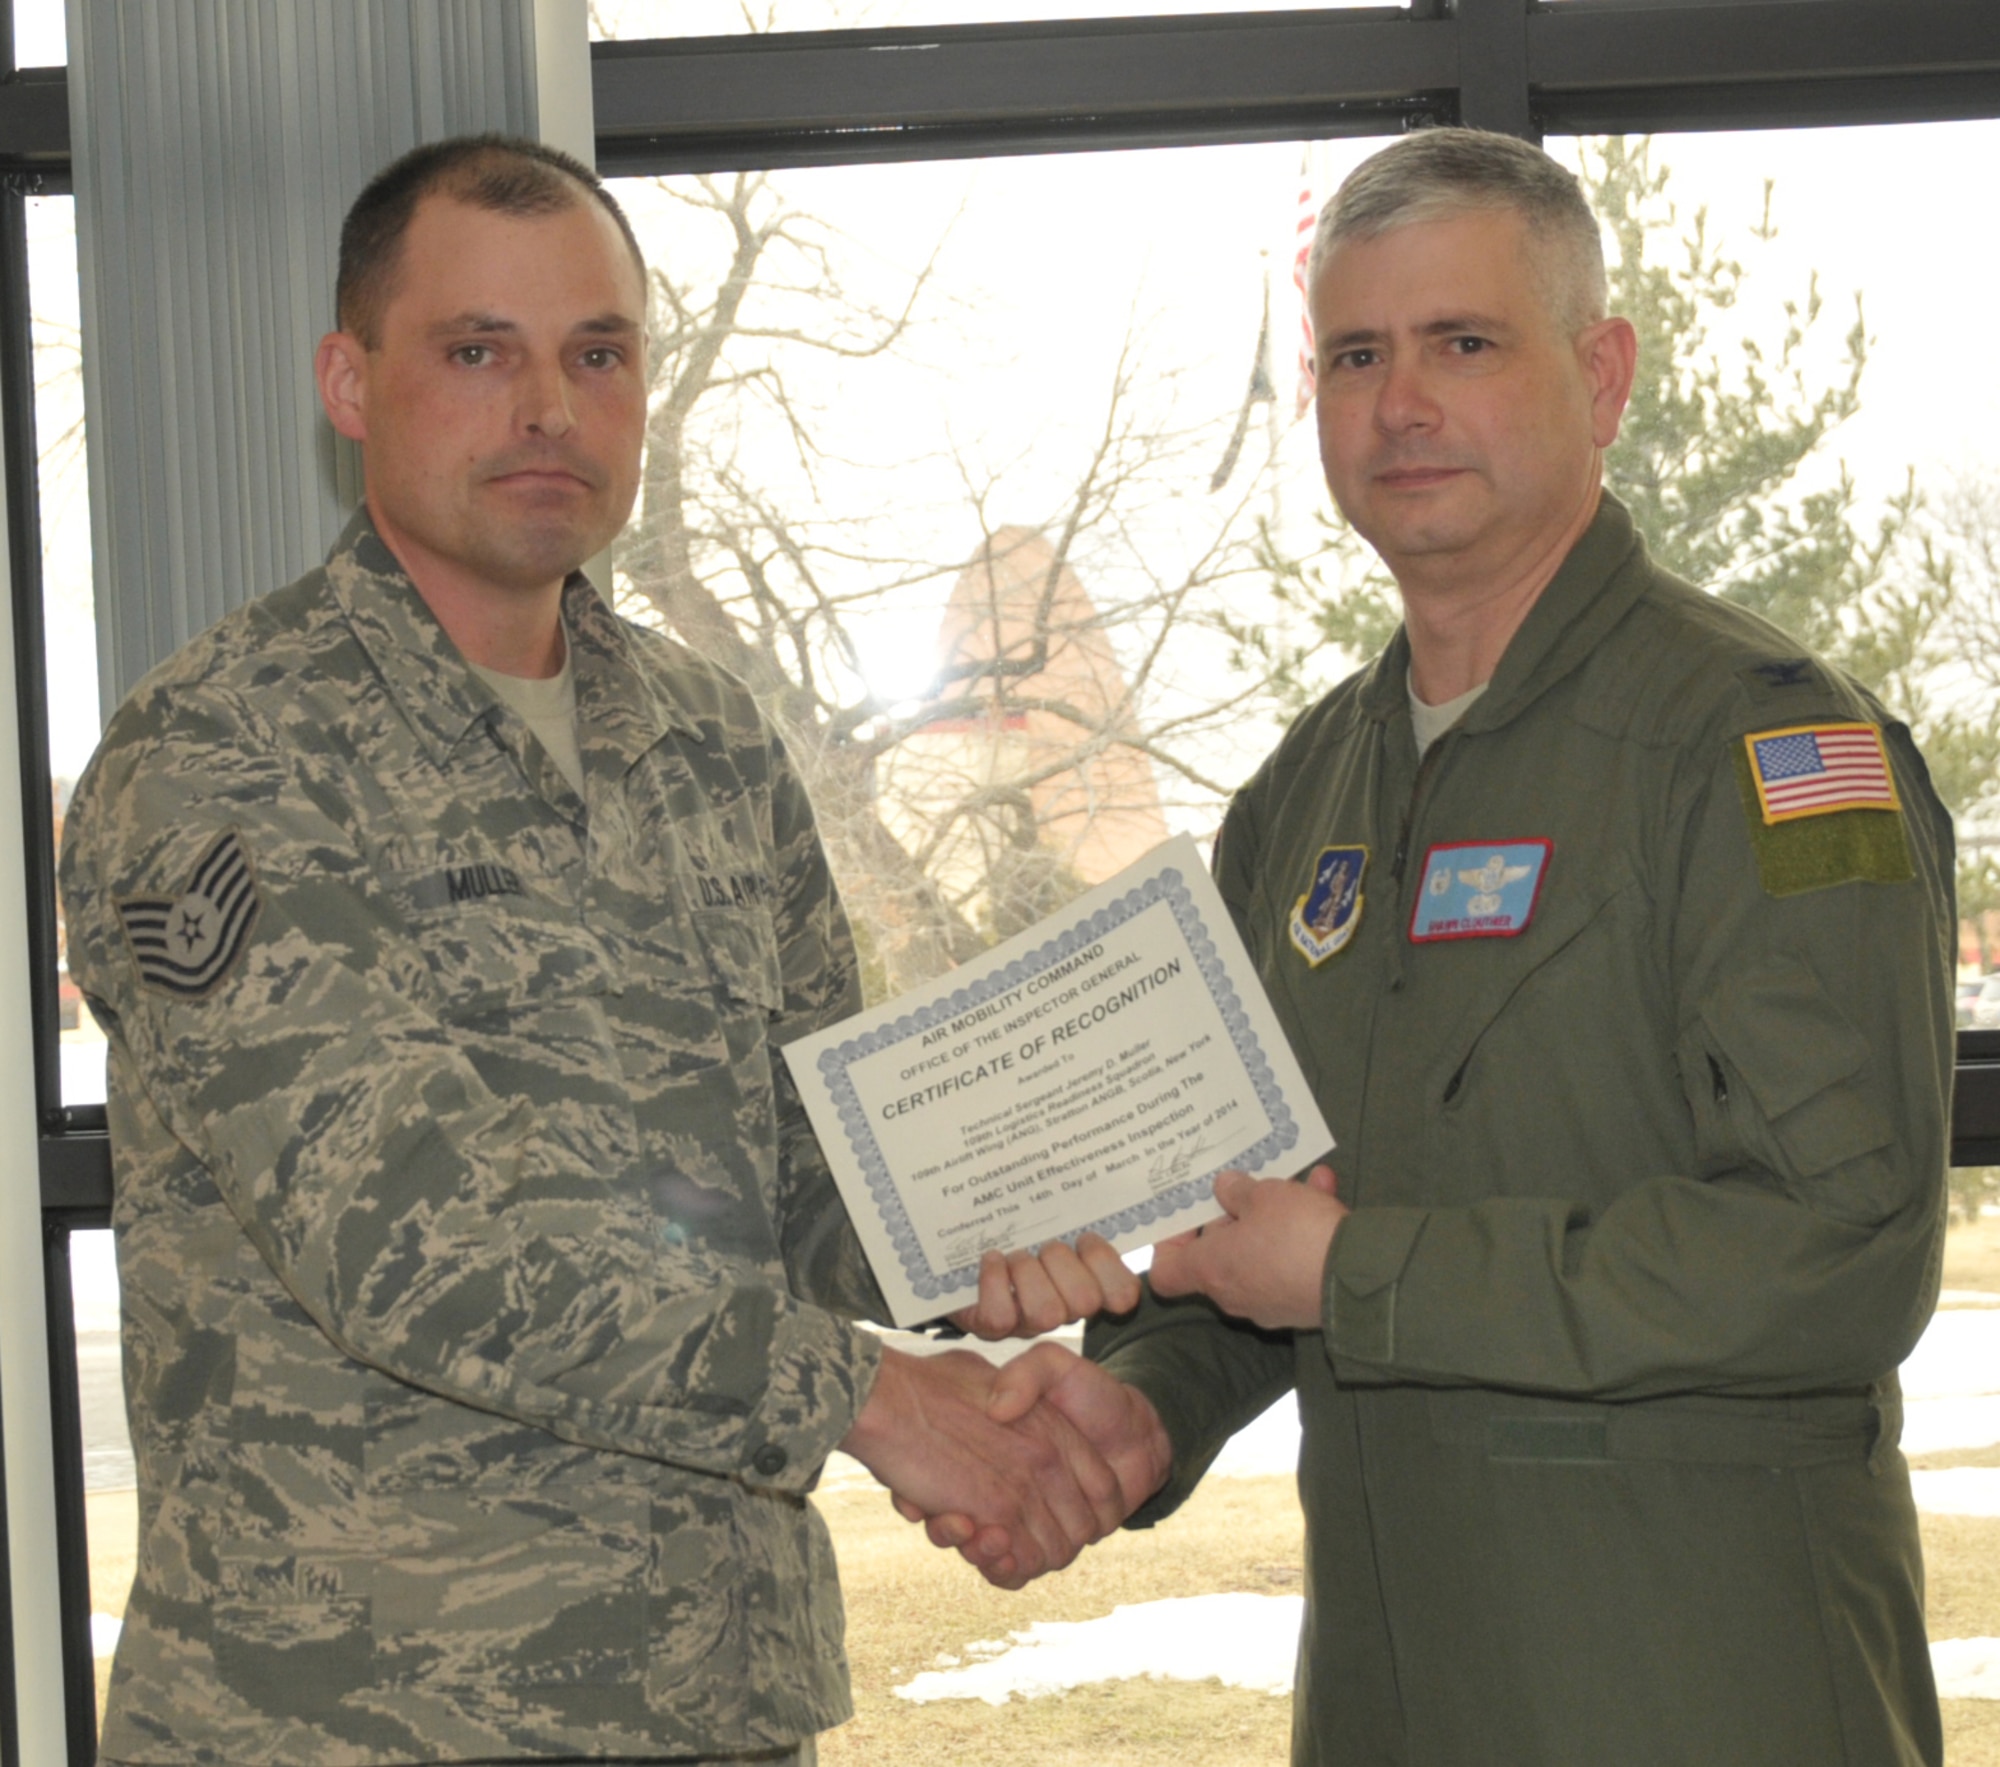 STRATTON AIR NATIONAL GUARD BASE -- Col. Shawn Clouthier (right), 109th Airlift Wing commander, presents Tech. Sgt. Jeremy Muller with a certificate of recognition March 25, 2014, from Air Mobility Command for outstanding performance during the 109th AW's recent Unit Effectiveness Inspection. Muller is assigned to the 109th Logistics Readiness Squadron. (Air National Guard photo by Master Sgt. William Gizara/Released)